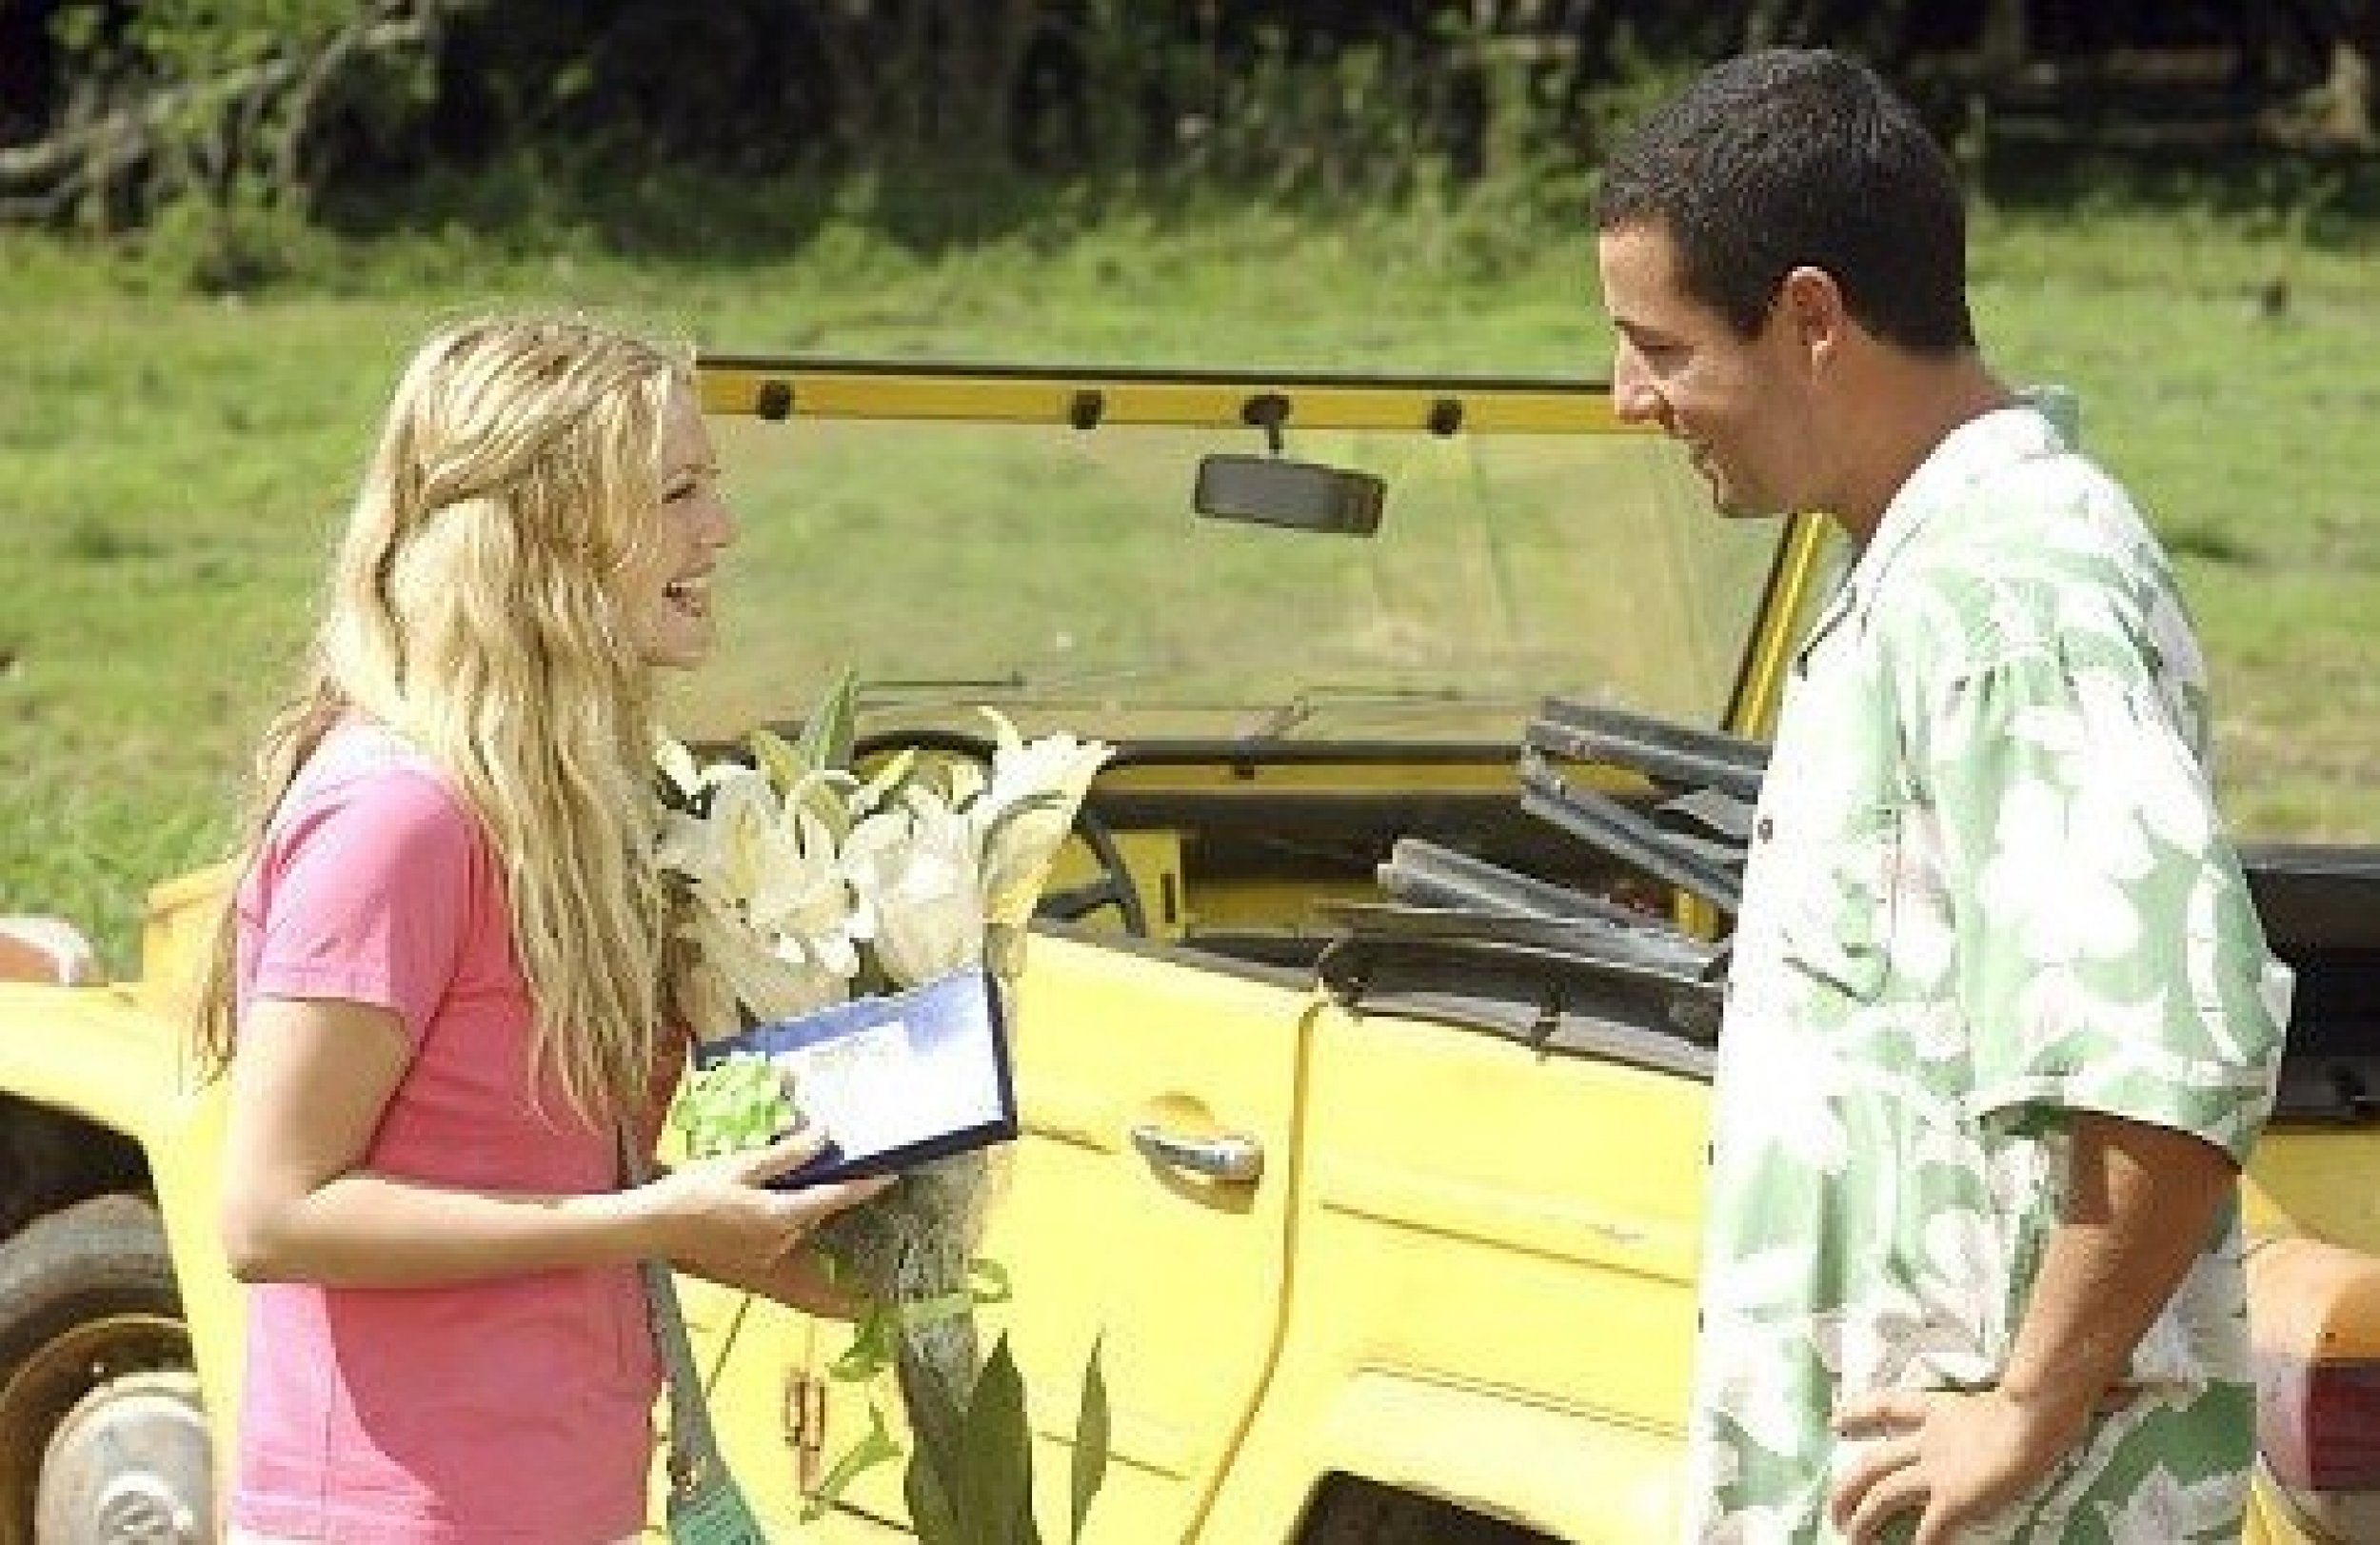 3. Henry Roth in 50 First Dates 2004